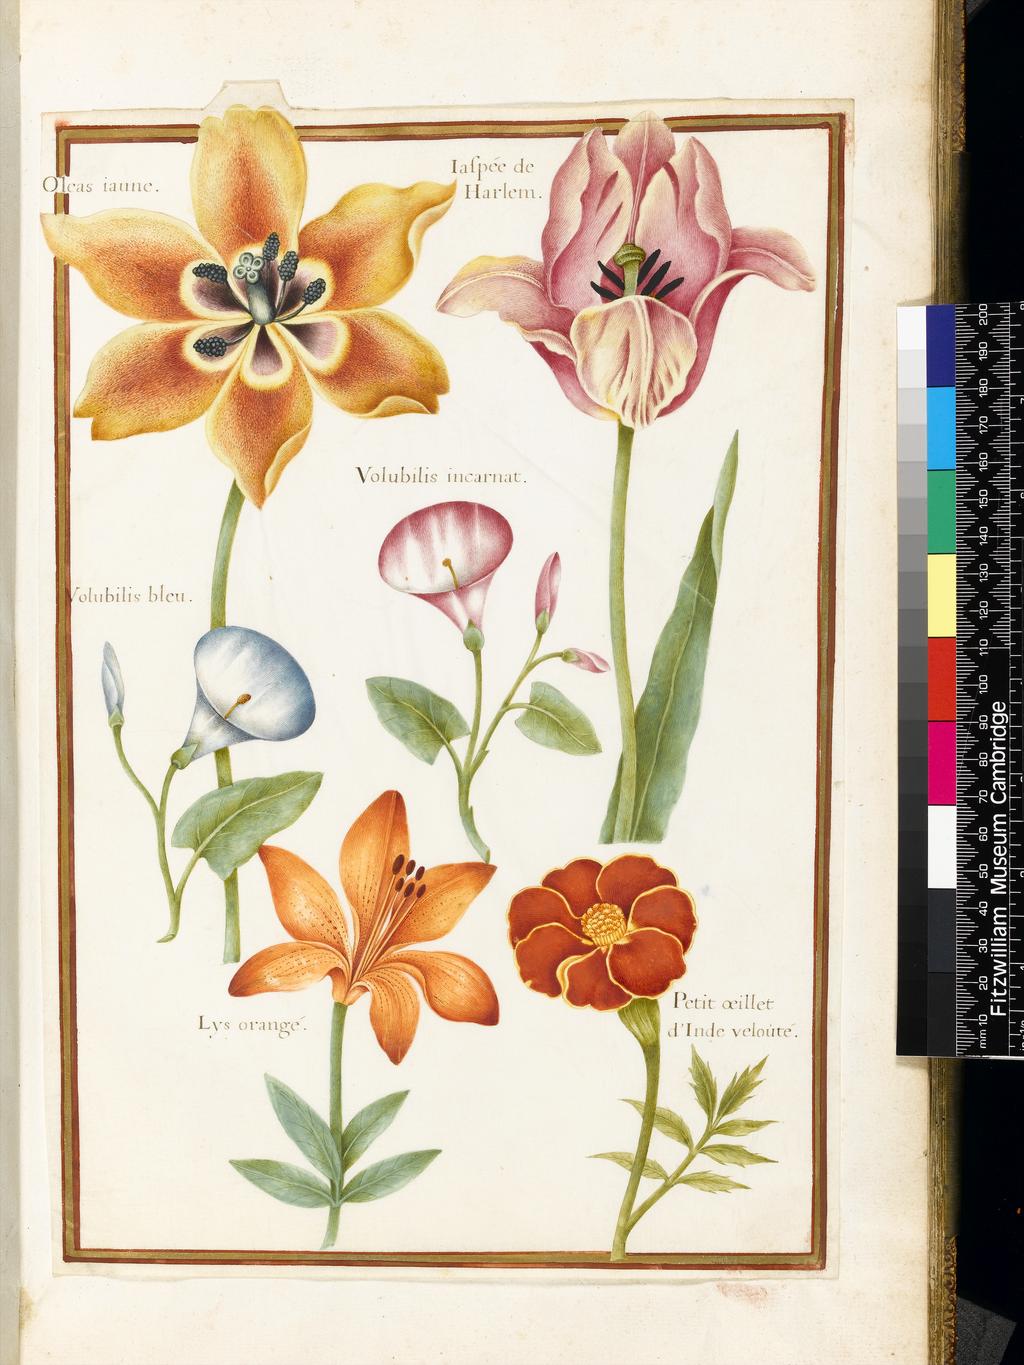 An image of Stylised drawings of two Tulips, two Convolvulus, one Lily, (Lilium bulbiferum), and one French Marigold. Robert, Nicolas attributed to (French, 1614-1685). Graphite, watercolour and bodycolour on vellum, height 320 mm, width 214 mm. Album containing 62 botanical drawings on vellum tipped in on the gilt-edged pages of the album which bear the watermark of an 18th century French paper-maker, Malmenayde of Thiers (active from 1731). Bound in red morocco with clasps, the spine tooled in gilt. The Pages are interleaved with thin protective paper. Ruled lines of red and gold border the drawings on all sides. 17th Century. French.